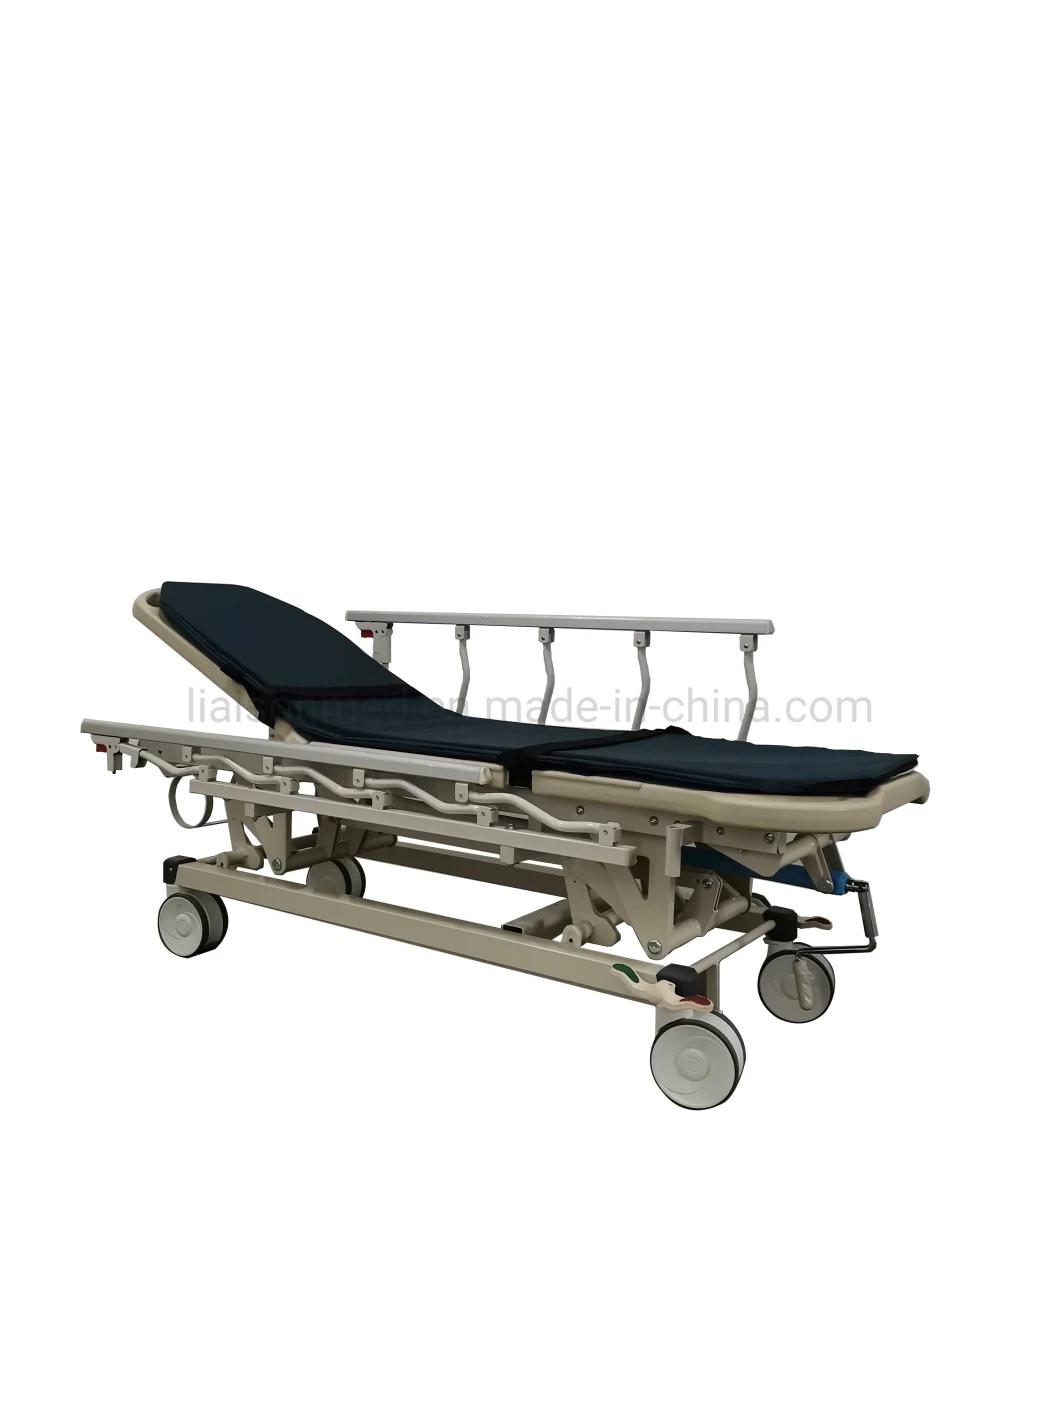 Liaison Blue Wooden Package 1930mm*663mm*510— 850mm Anhui Province Medical Stretcher